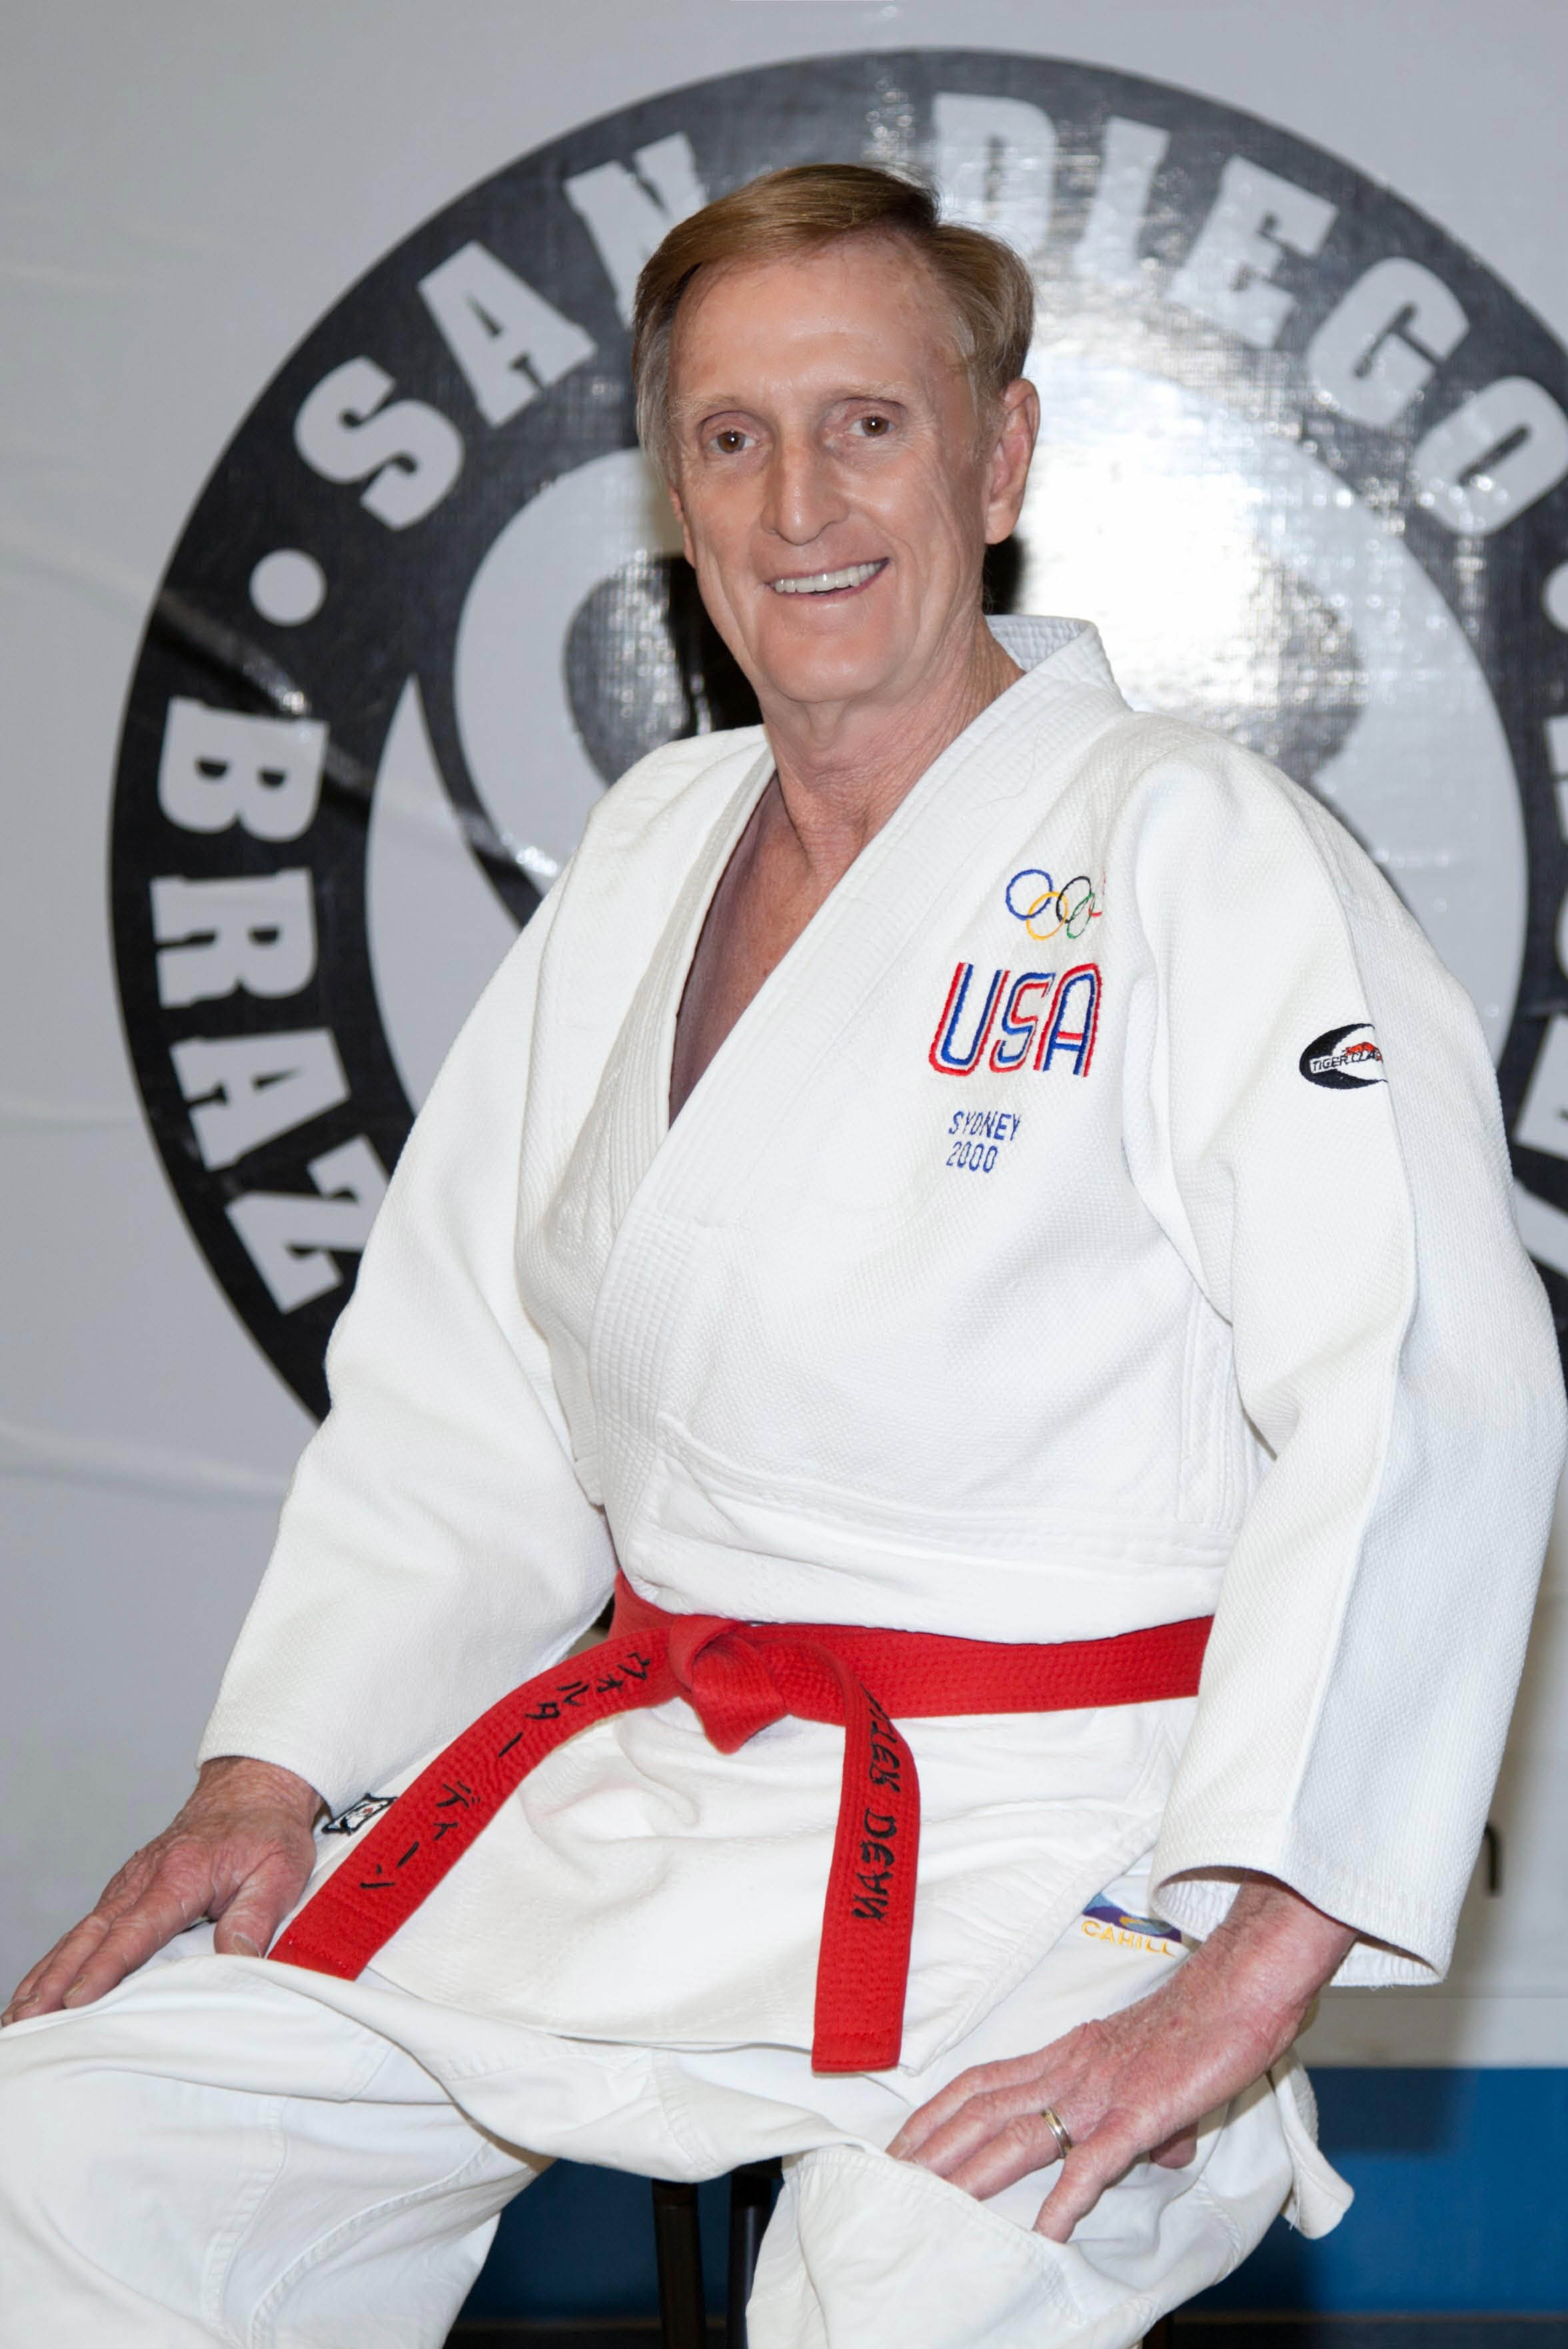 Sensei Walter Dean Known For His Advocacy of Judo to Disabled and Especially to the Blind and Visually Impaired